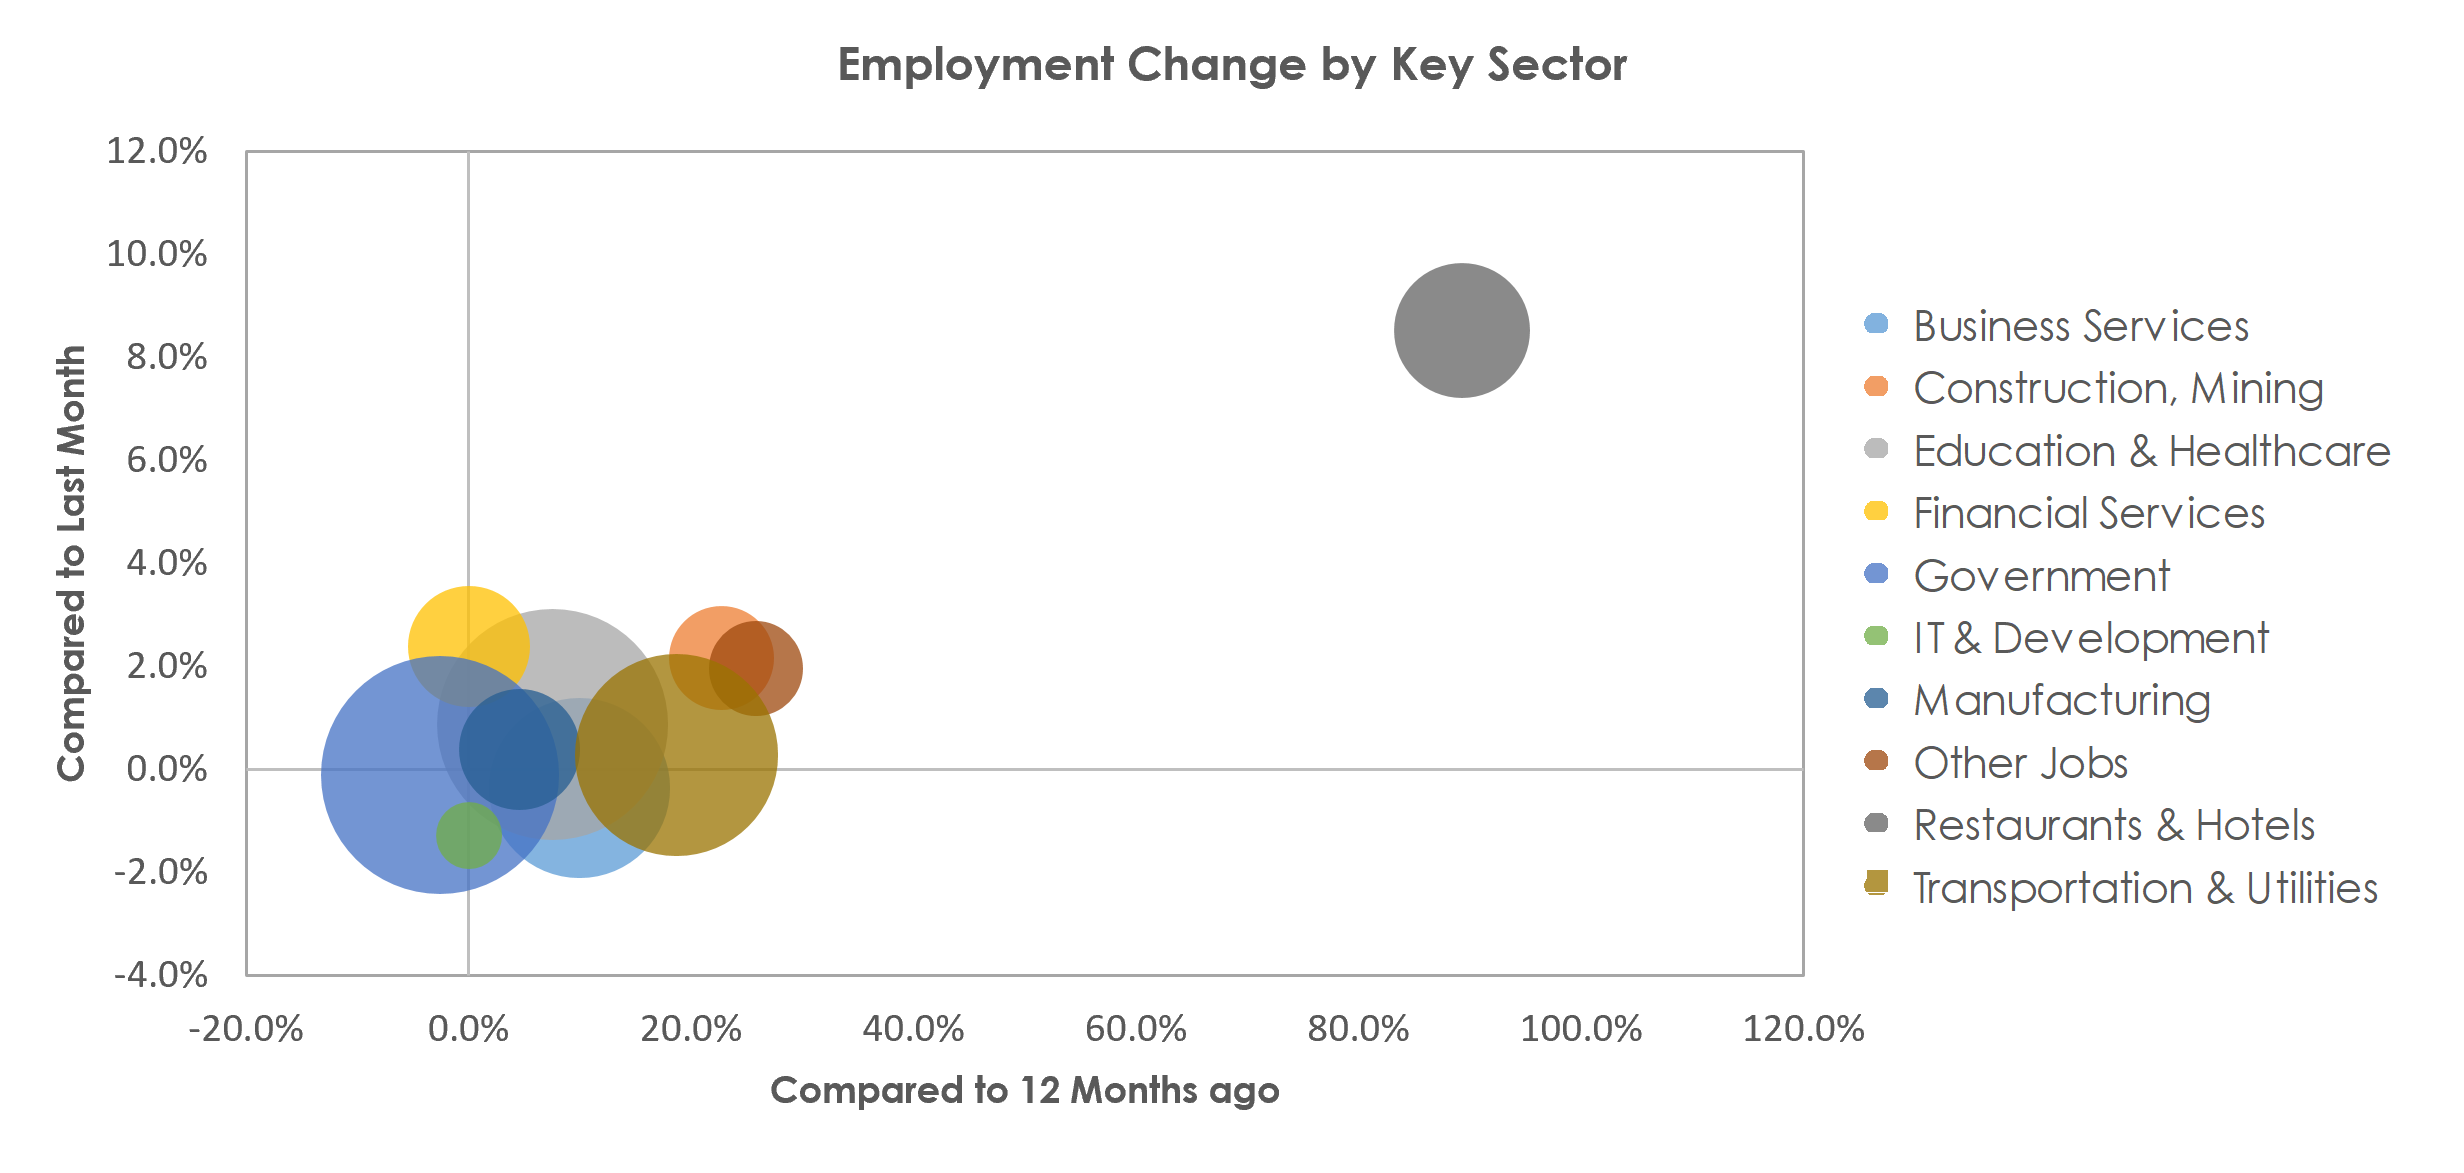 Albany-Schenectady-Troy, NY Unemployment by Industry April 2021